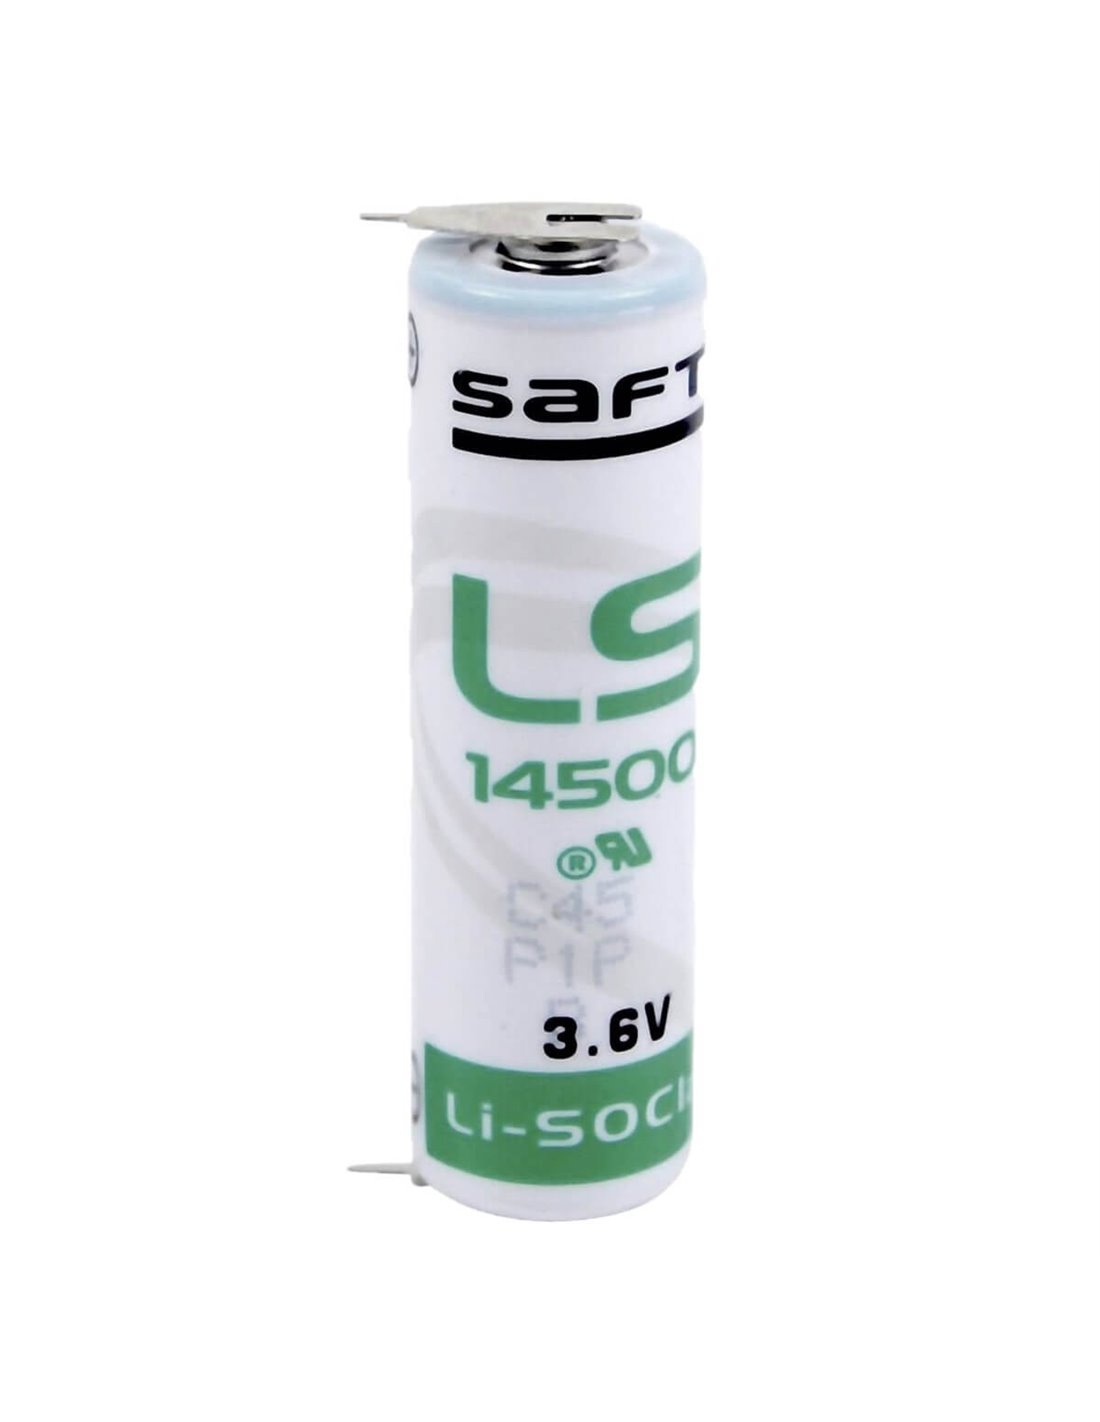 Saft LS14500-AX AA 3.6V Primary Lithium Battery - Clearance Sale